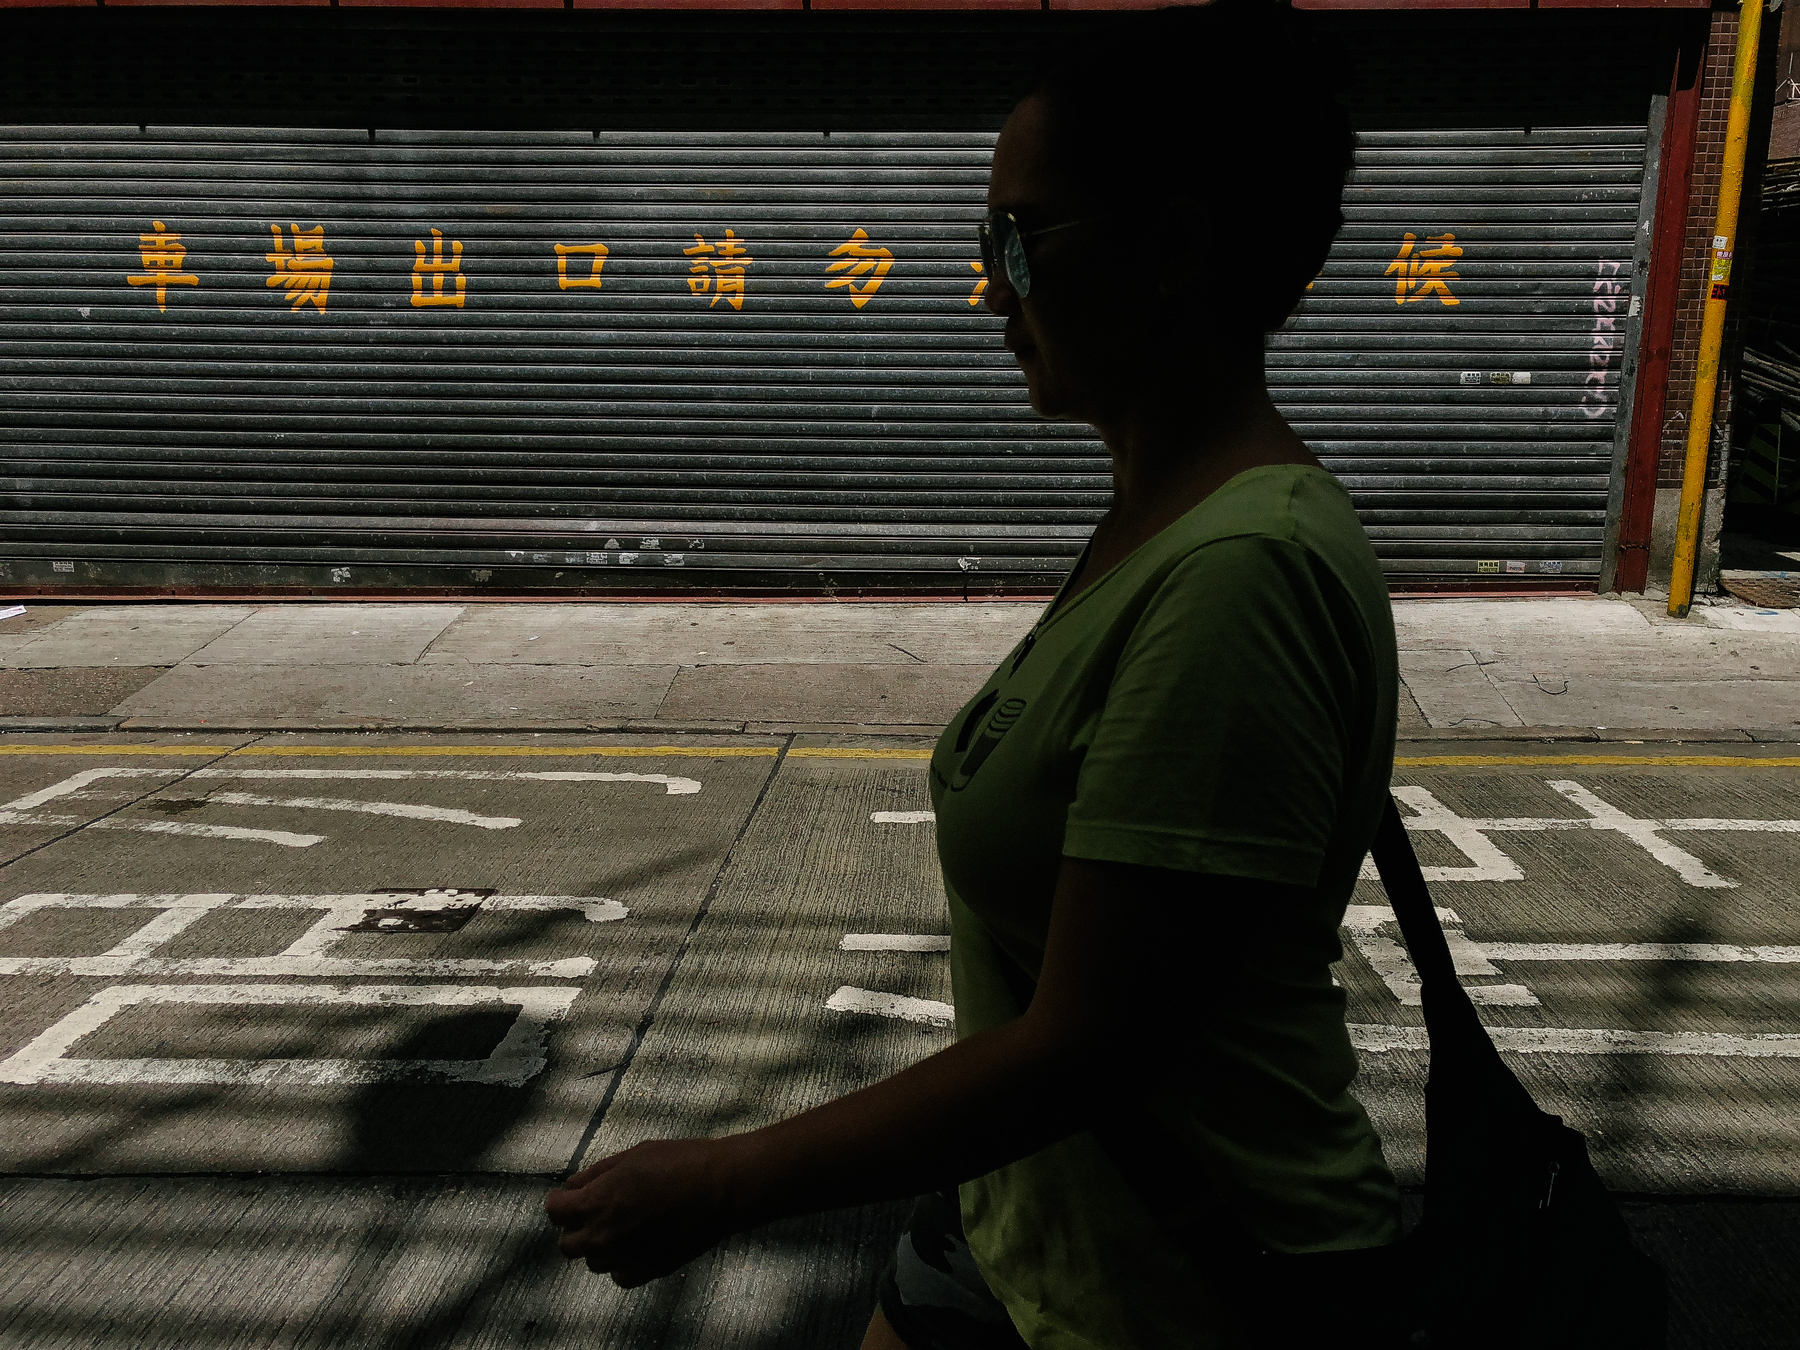 A woman walks across the photo. In the background, and on the street, Chinese characters are written 